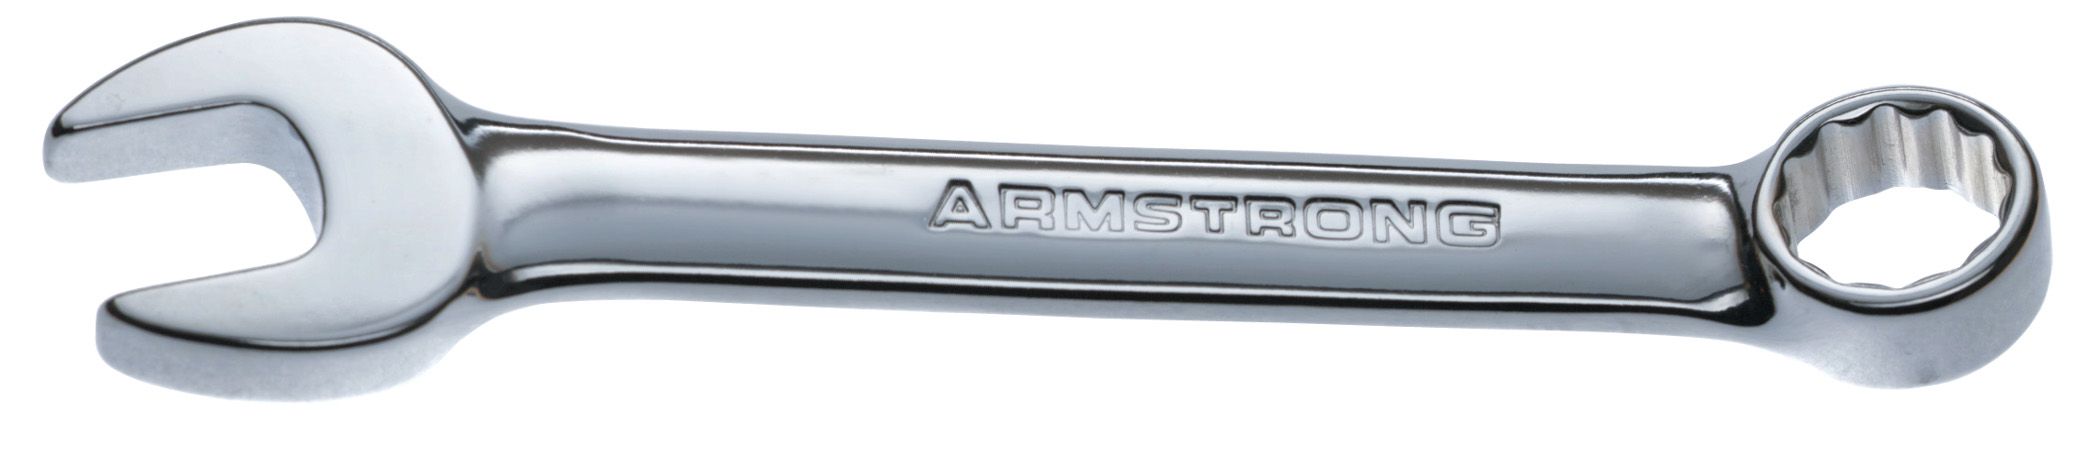 Armstrong 16 mm 12 pt. Full Polish Short Combination Wrench